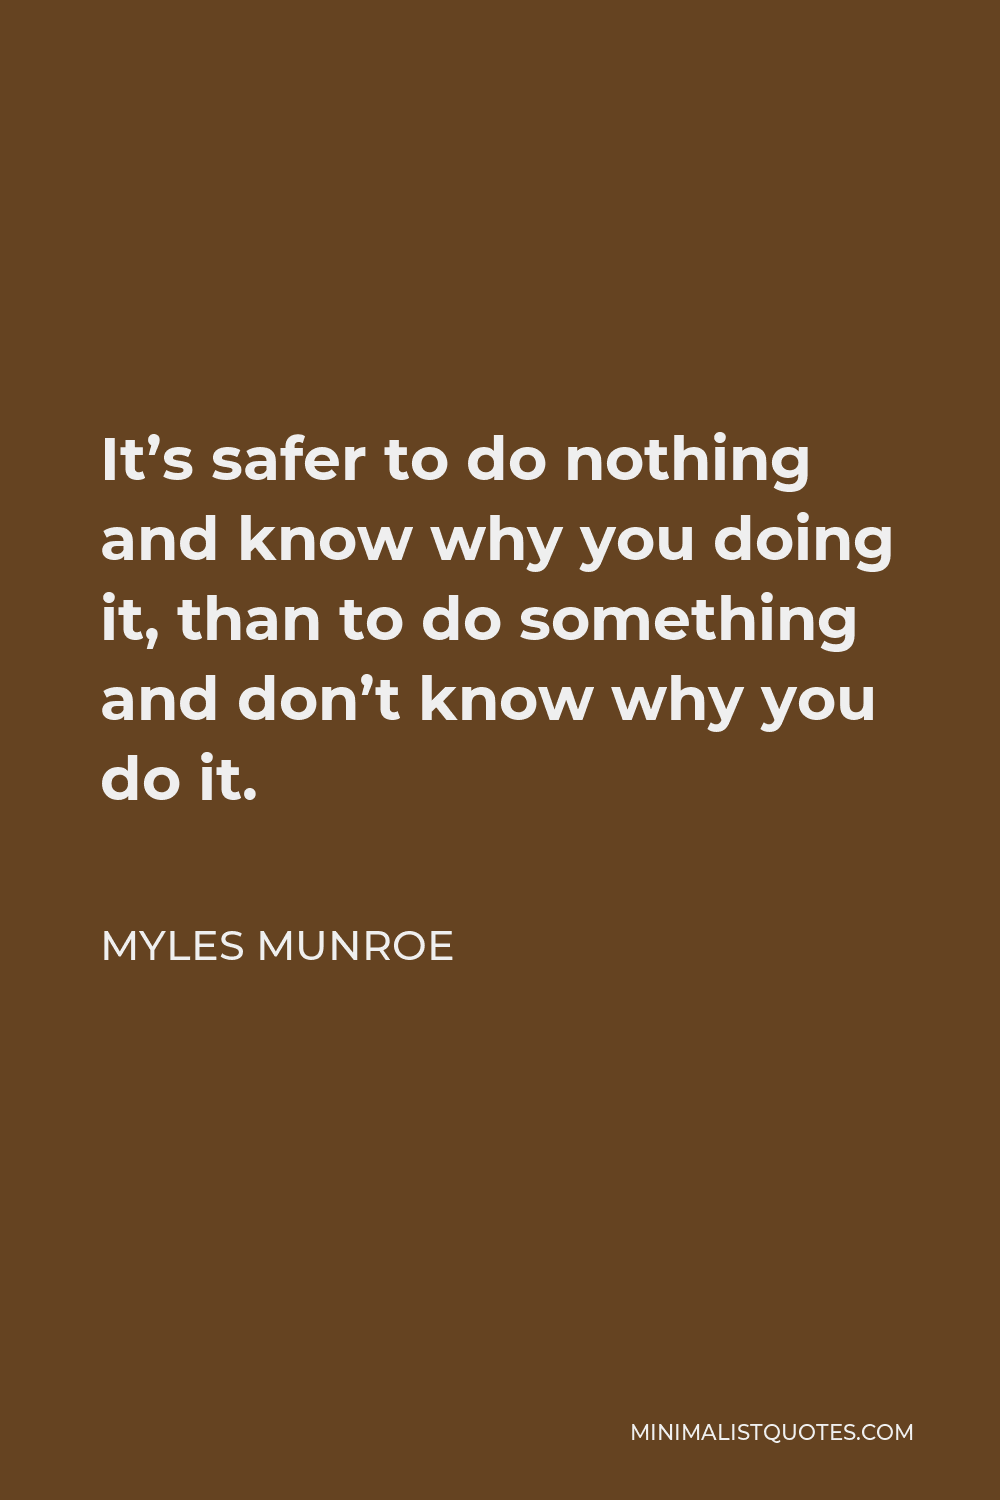 Myles Munroe Quote - It’s safer to do nothing and know why you doing it, than to do something and don’t know why you do it.